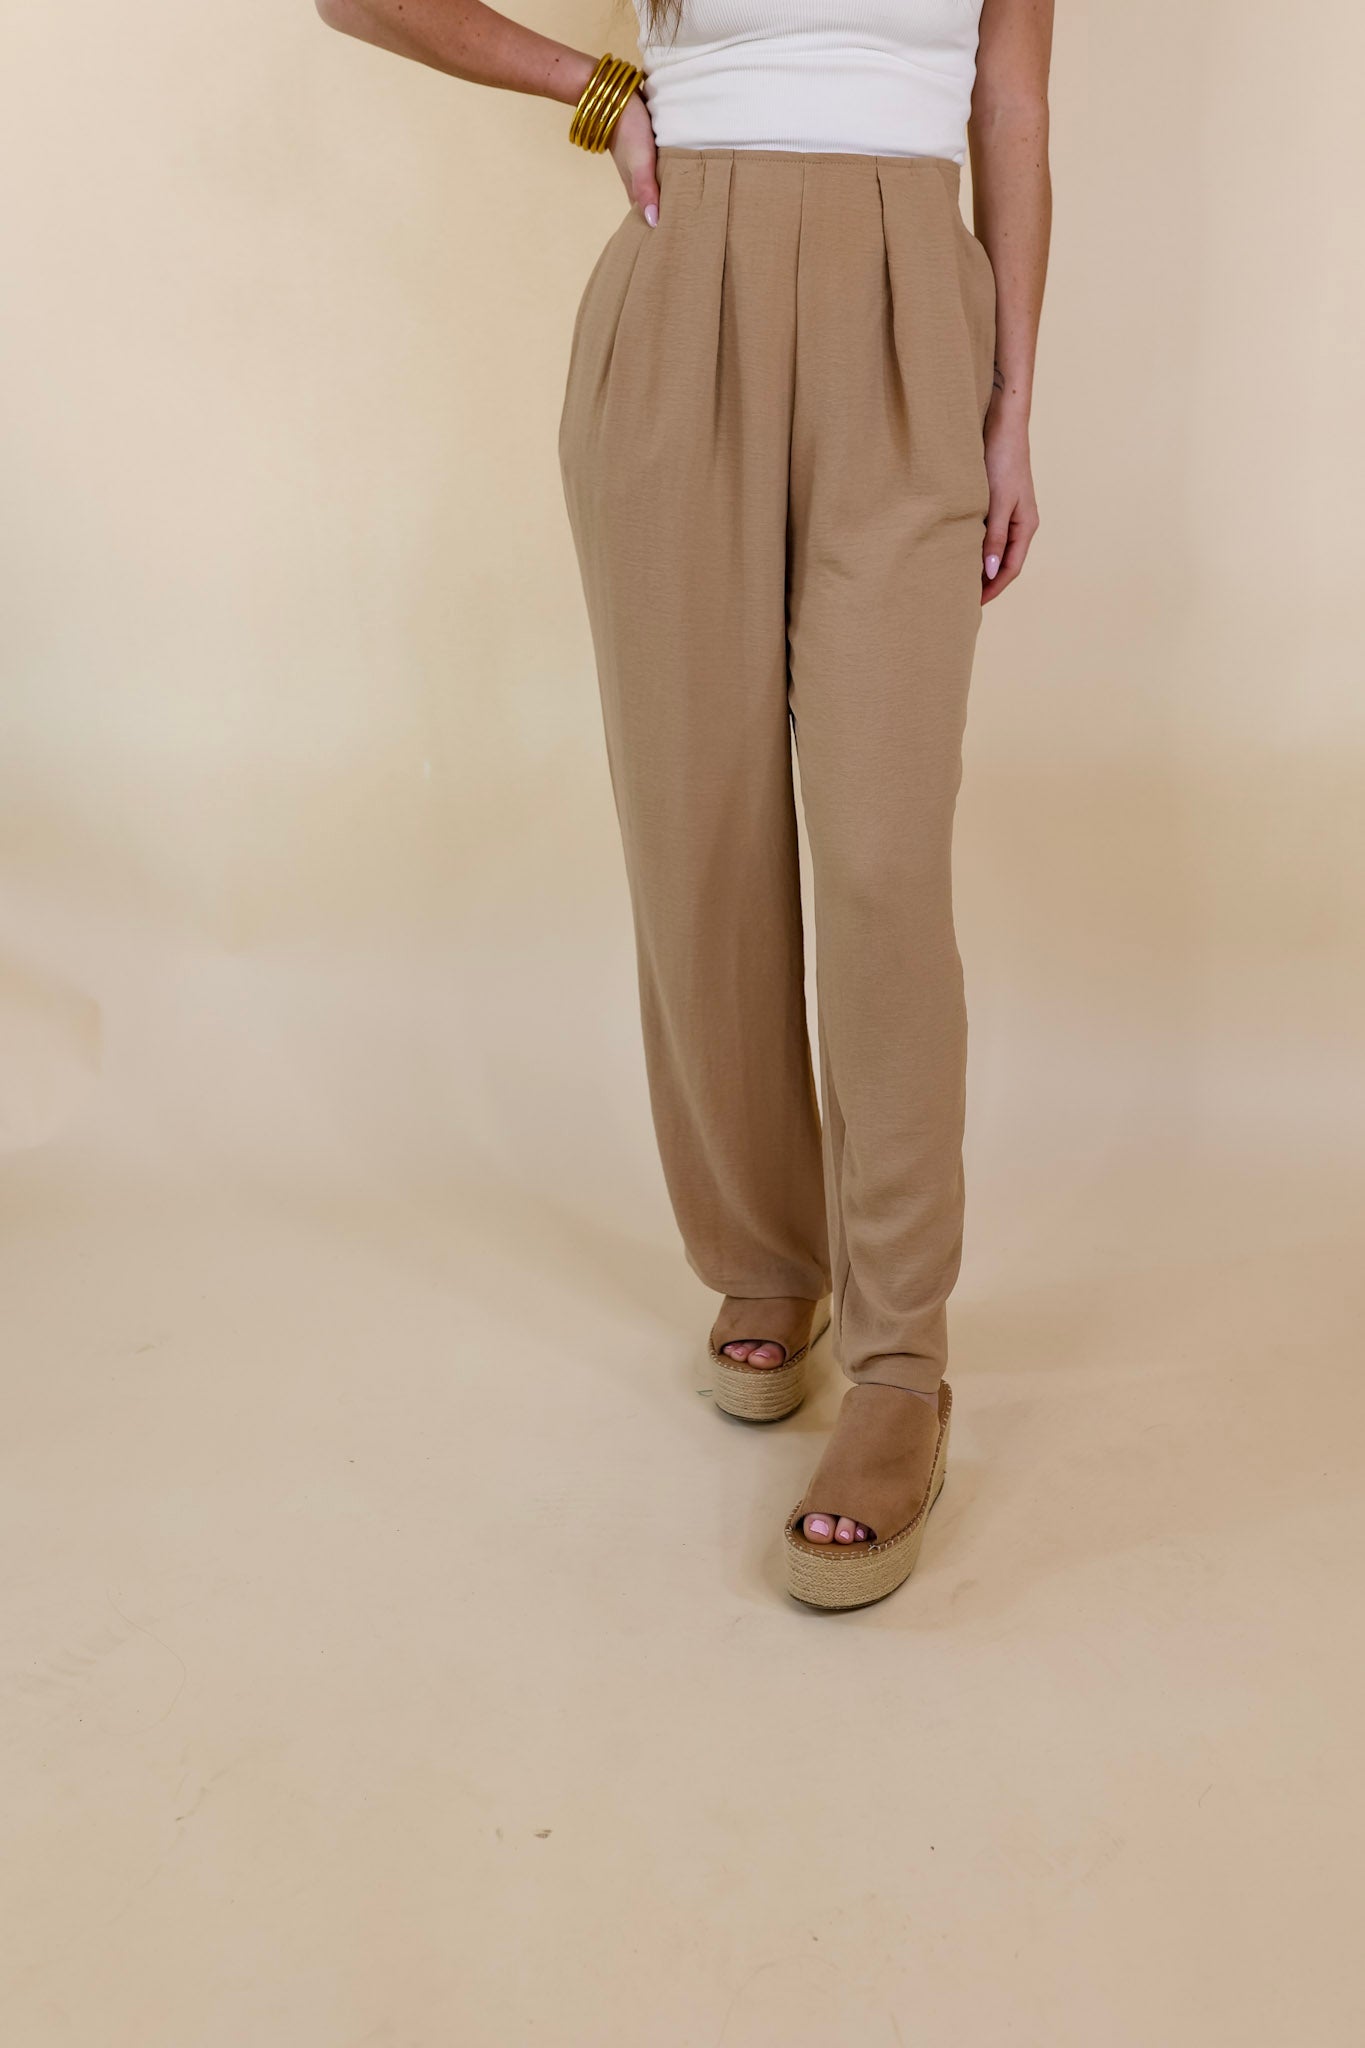 Trading Favors Pleated Detail Pants in Light Tan - Giddy Up Glamour Boutique